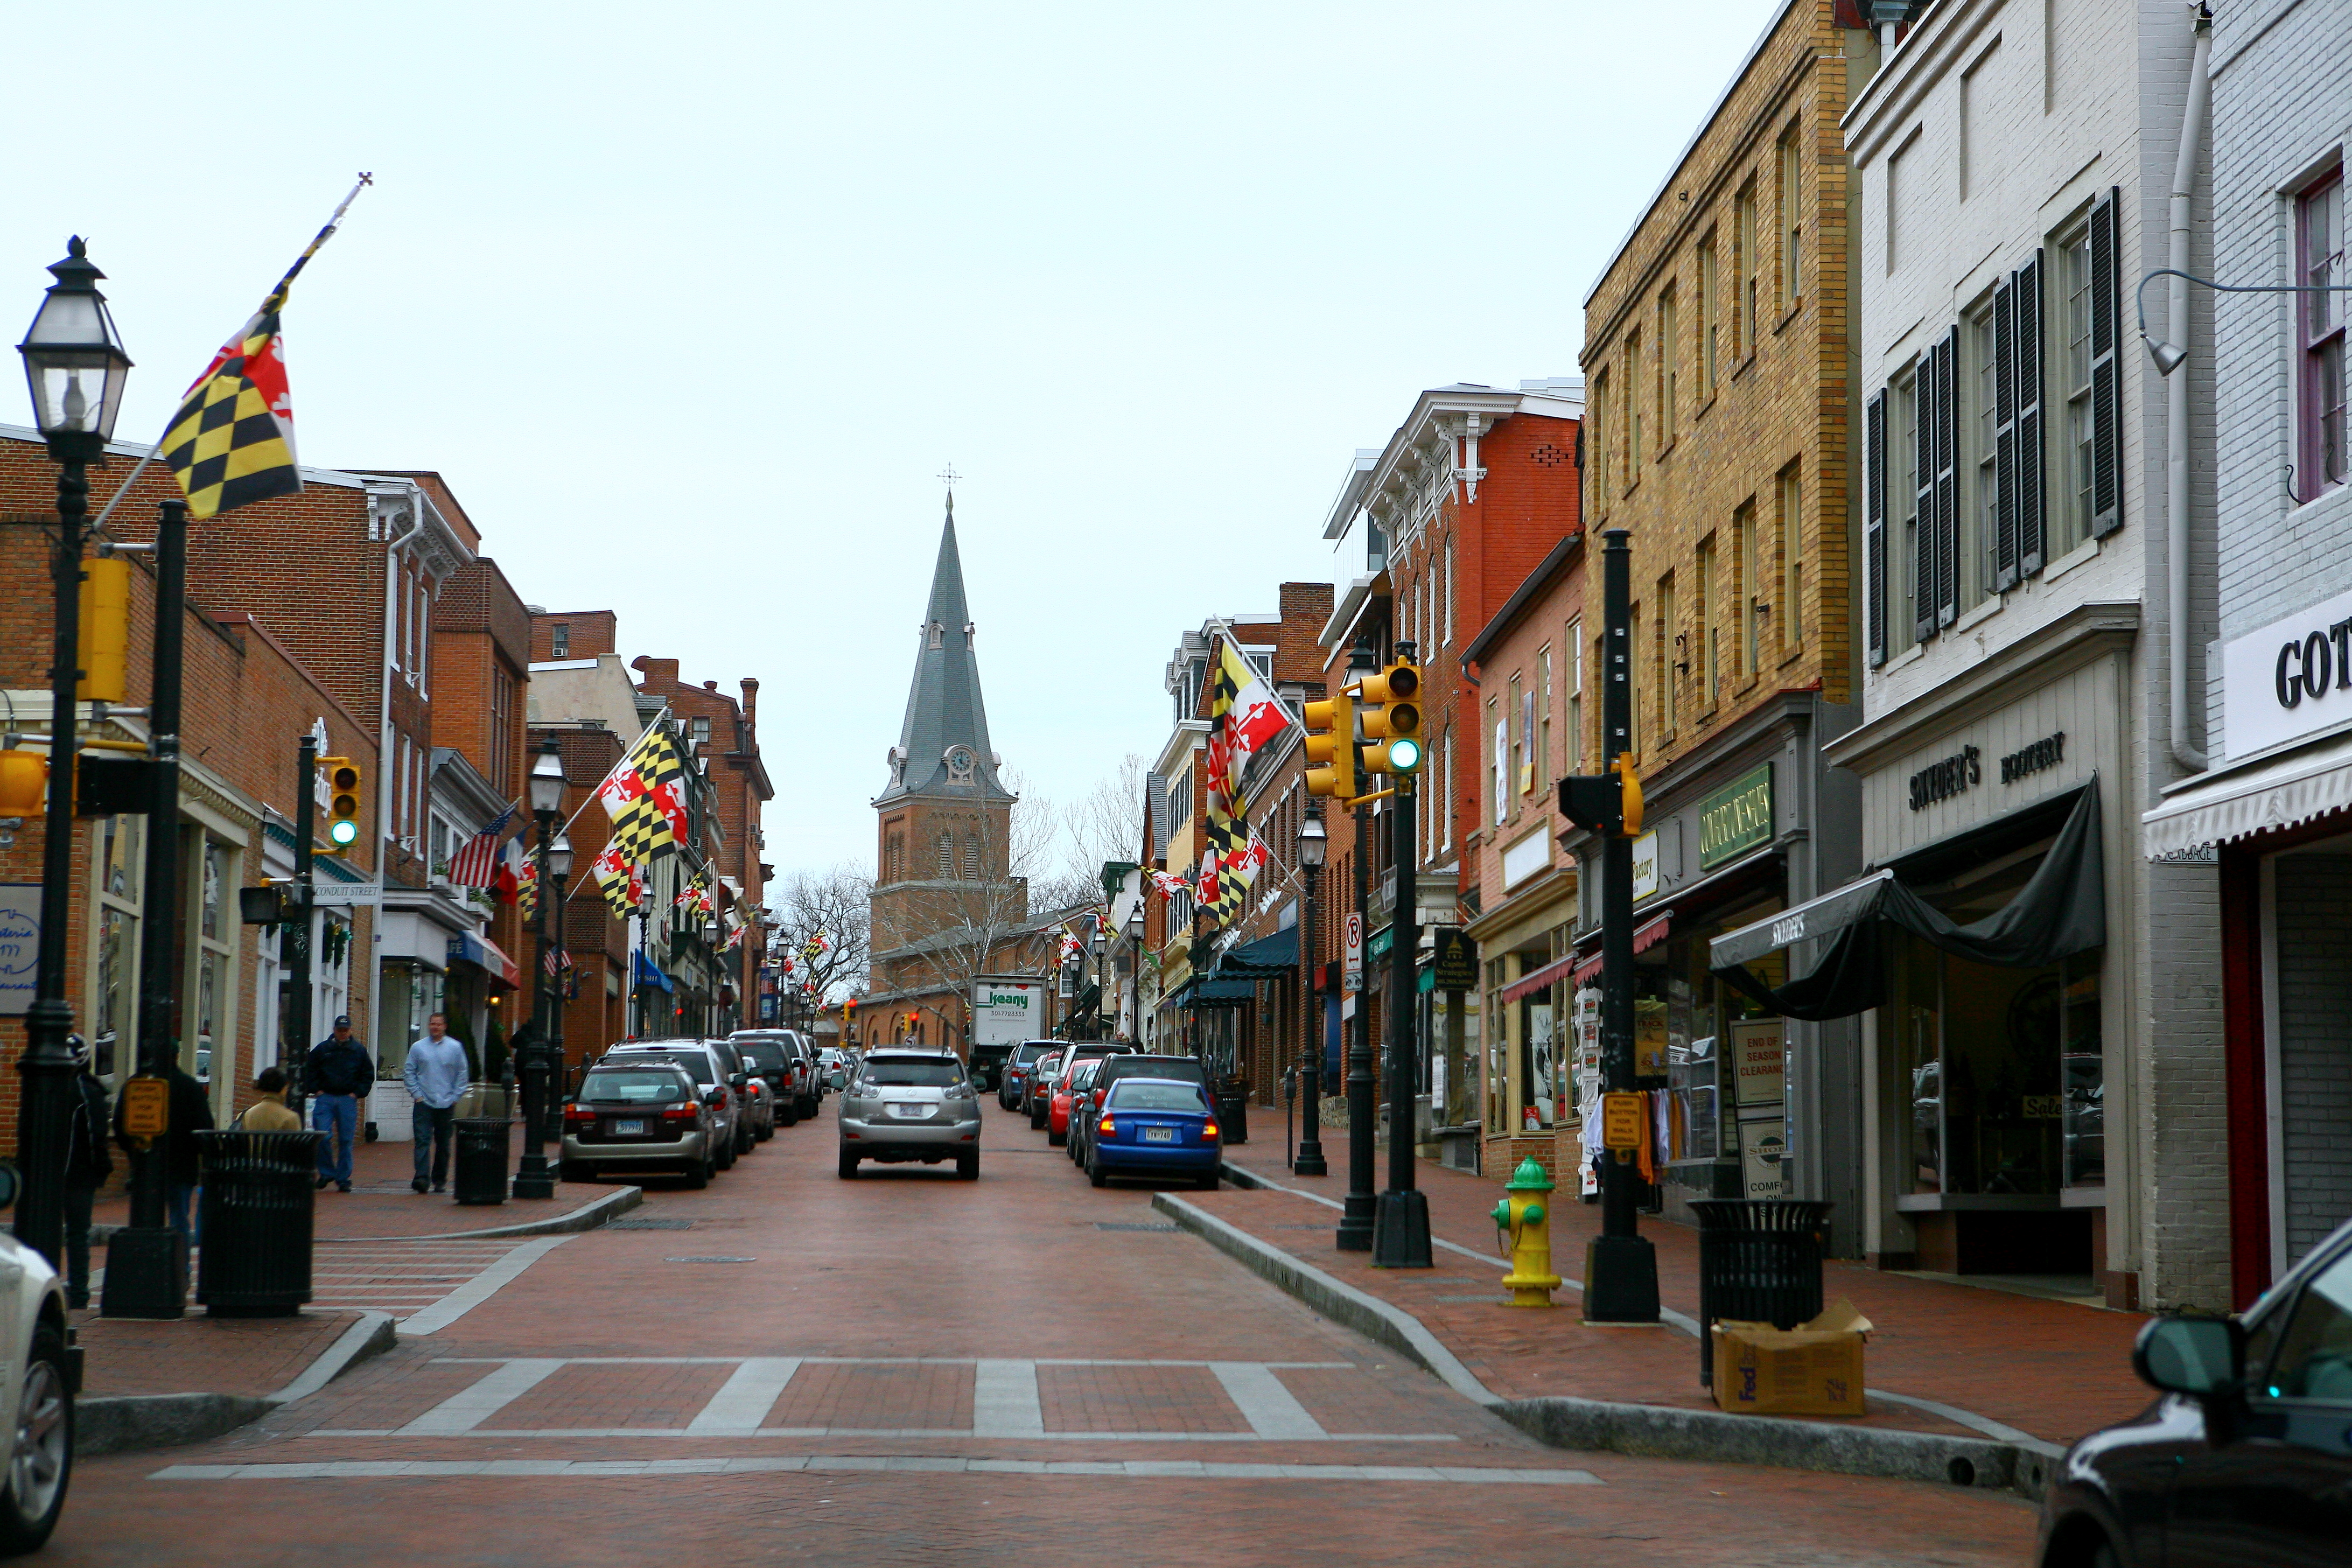 Annapolis (  ə-NAP-əl-iss) is the capital city of the U.S. state of Maryland and the county seat of, and only incorporated city in, Anne Arundel County. Situated on the Chesapeake Bay at the mouth of the Severn River, 25 miles (40 km) south of Baltimore and about 30 miles (50 km) east of Washington, D.C., Annapolis forms part of the Baltimore–Washington metropolitan area. The 2020 census recorded its population as 40,812, an increase of 6.3% since 2010.
This city served as the seat of the Confederation Congress, formerly the Second Continental Congress, and temporary national capital of the United States in 1783–1784. At that time, General George Washington came before the body convened in the new Maryland State House and resigned his commission as commander of the Continental Army. A month later, the Congress ratified the Treaty of Paris of 1783, ending the American Revolutionary War, with Great Britain recognizing the independence of the United States.
The city and state capitol was also the site of the 1786 Annapolis Convention, which issued a call to the states to send delegates for the Constitutional Convention to be held the following year in Philadelphia. Over 220 years later, the Annapolis Peace Conference took place in 2007.
Annapolis is the home of St. John's College, founded 1696. The United States Naval Academy, established 1845, is adjacent to the city limits.